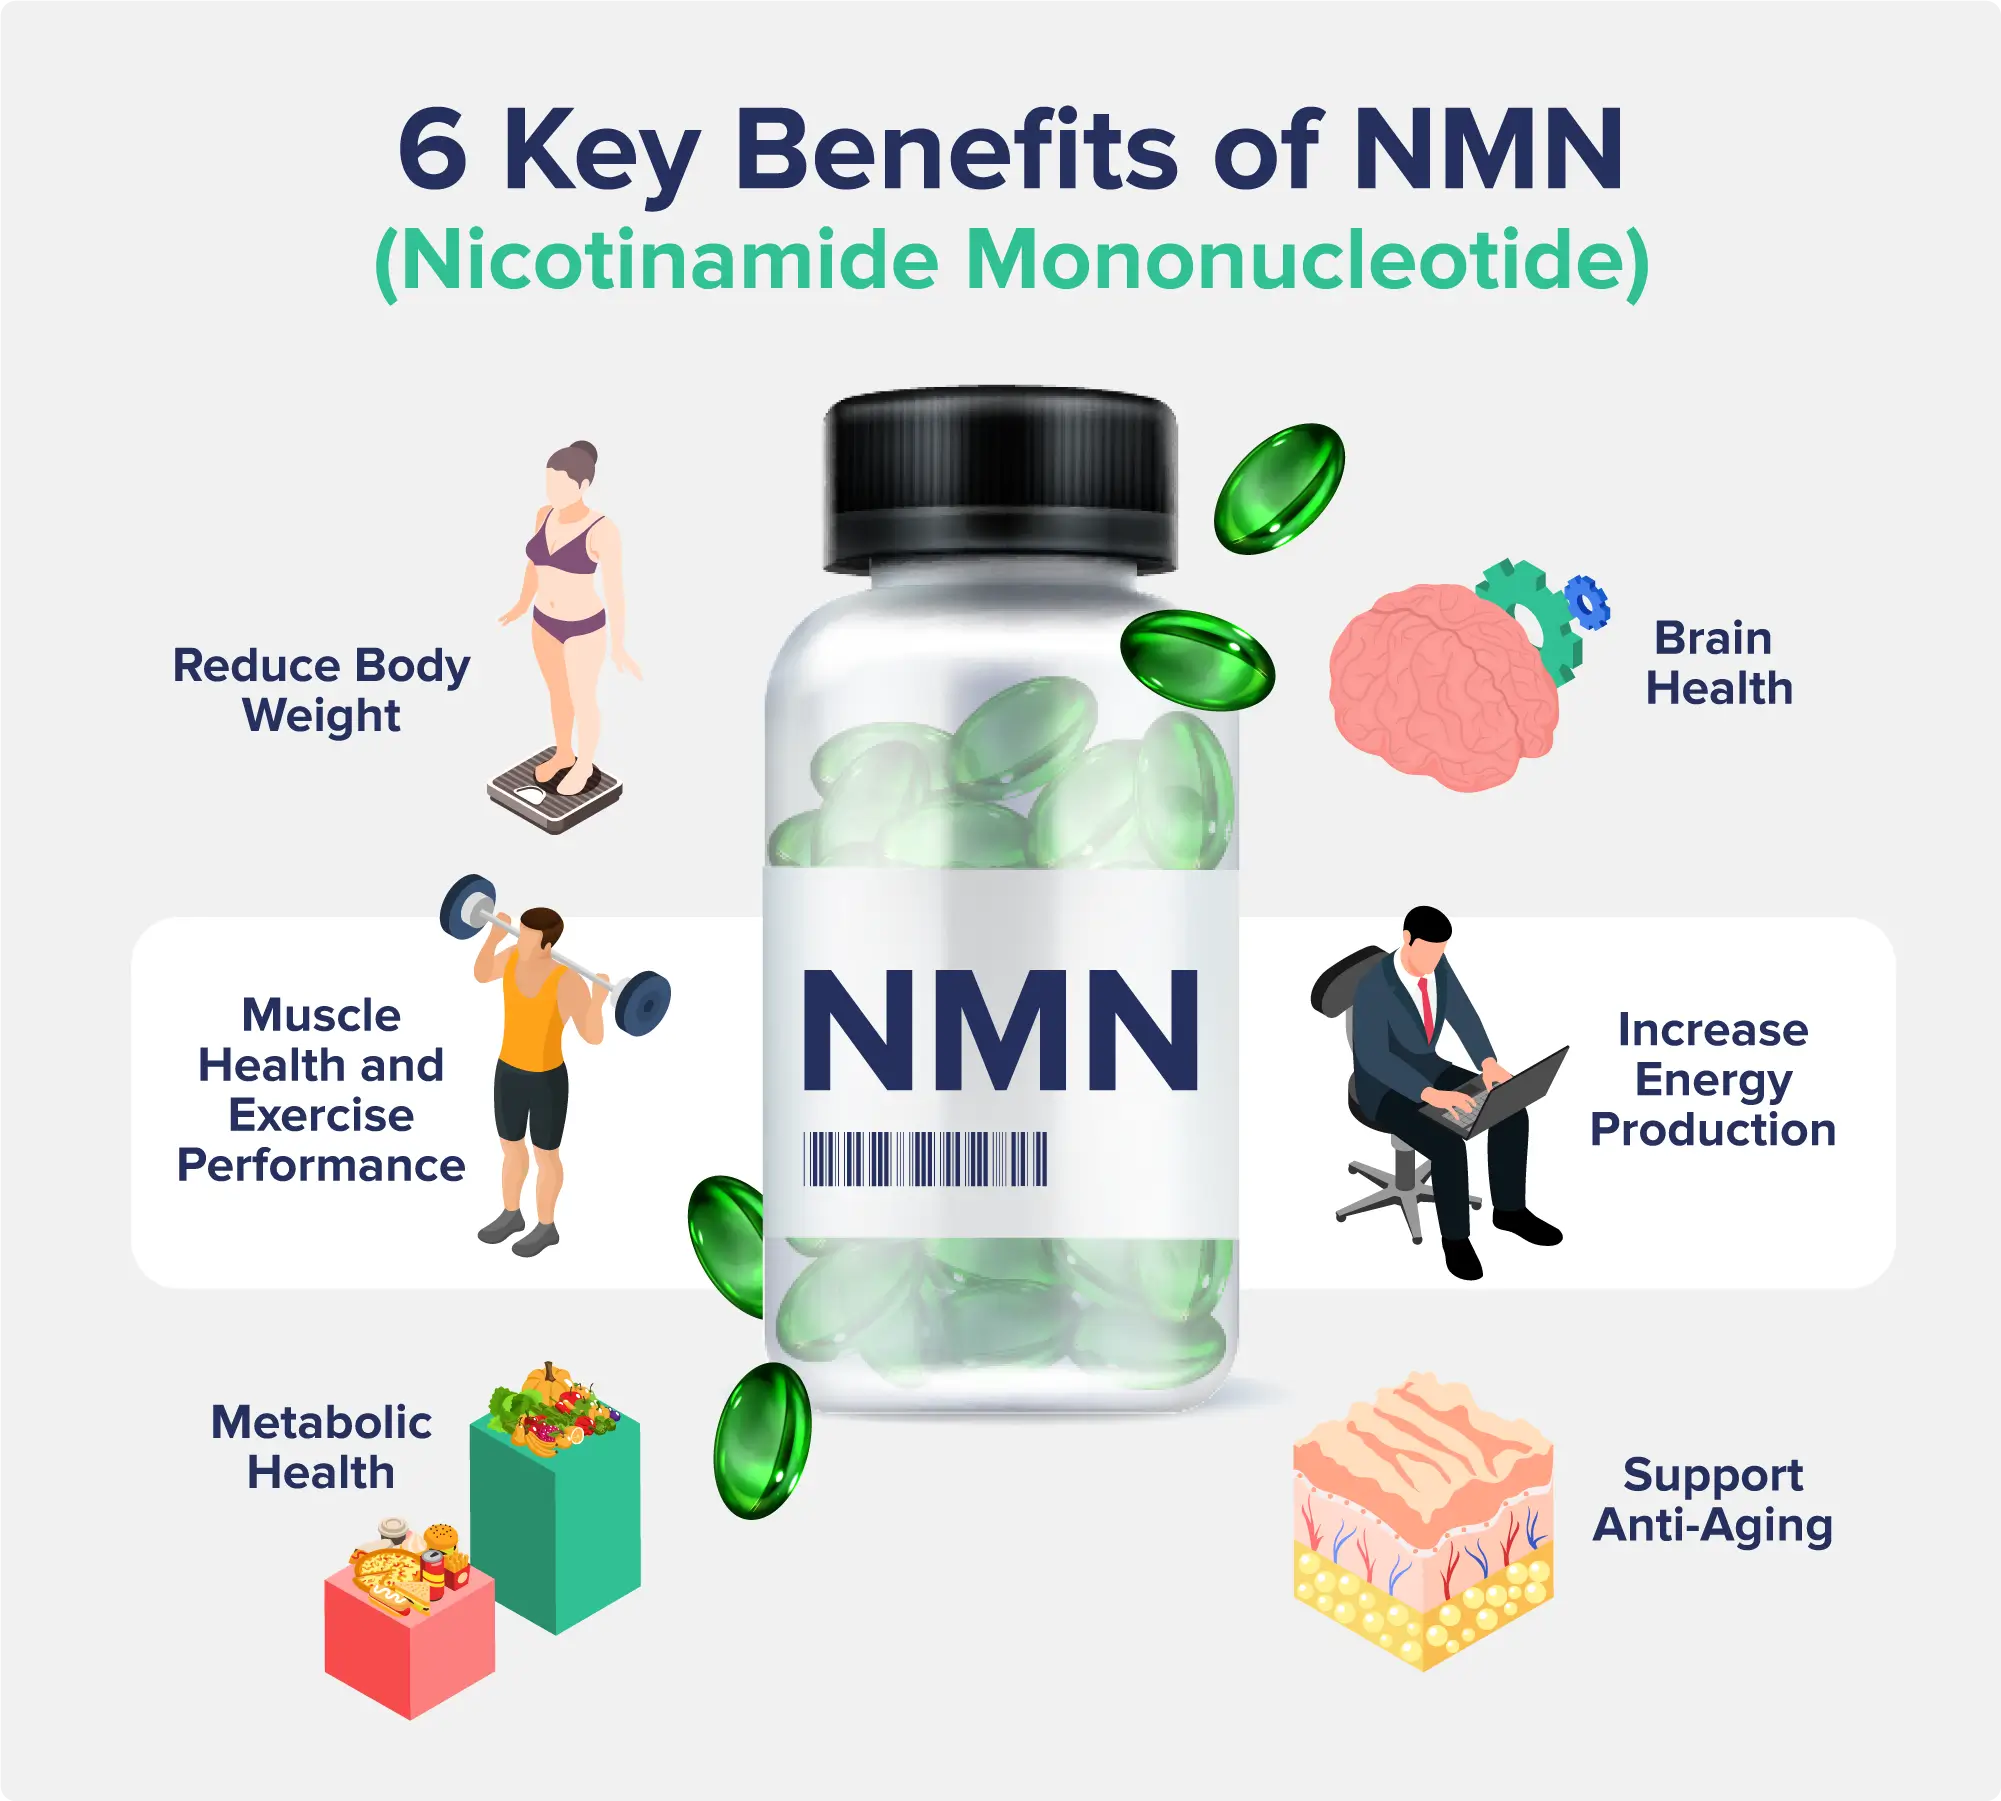 A graphic entitled "6 Key Benefits of NMN" depicting a bottle of green gelatin capsules (labeled NMN) with pictures of various benefits around it, like brain health, energy production, and more.